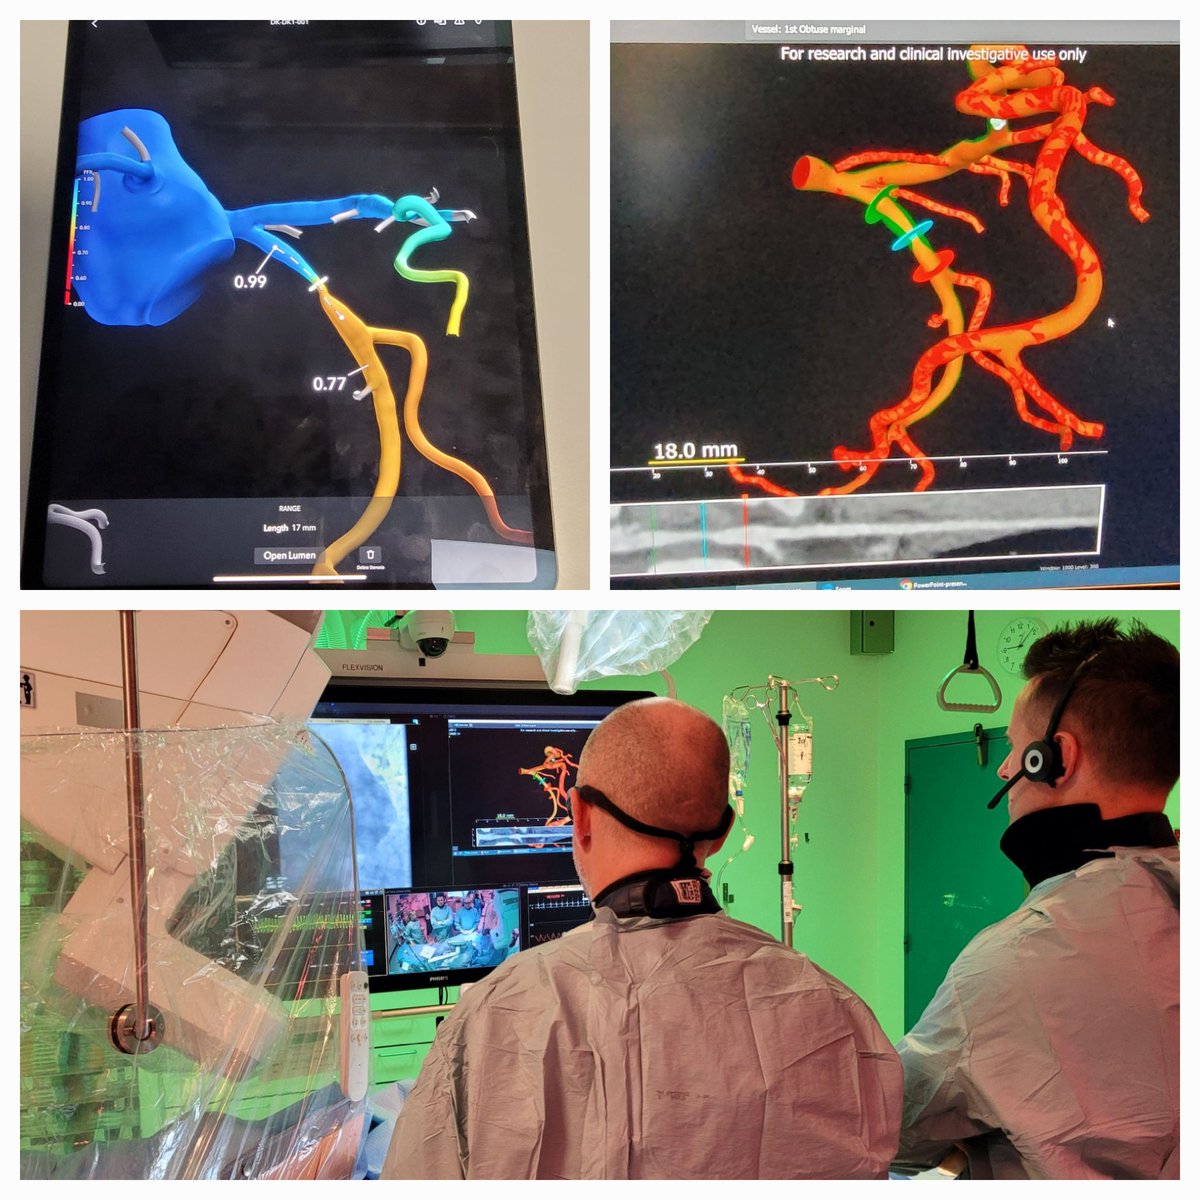 Exciting week for interventional cardiology @AUHCardio. First patient included in the “Precise Procedural and PCI Plan (P4) study”. Great backup from PI @ColletCarlos and @CoreAalst
Huge potential #CTguidedPCI and the future in treatment of  #CAD. @MichaelMaeng1 #RadialFirst